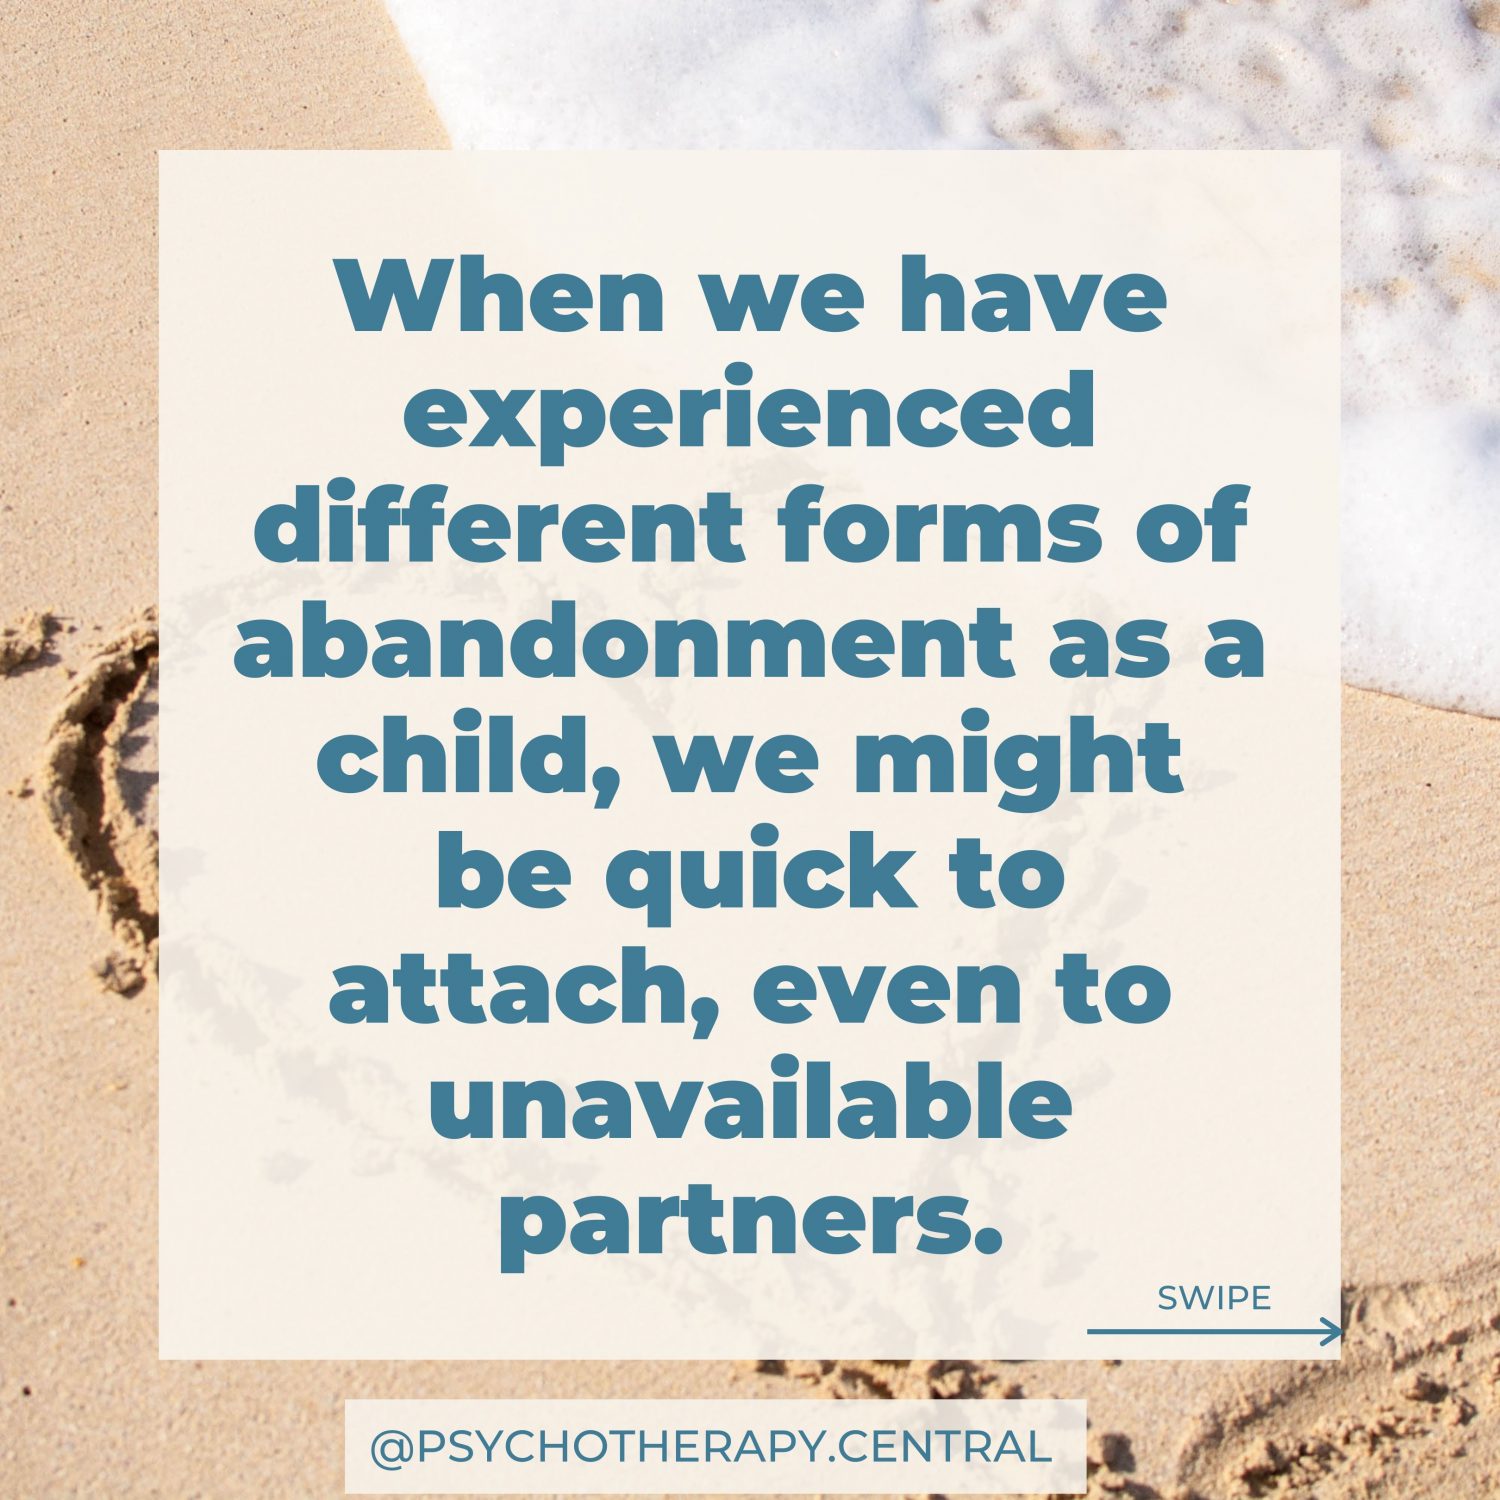 When we have experienced different forms of abandonment as a child, we might be quick to attach, even to unavailable partners.